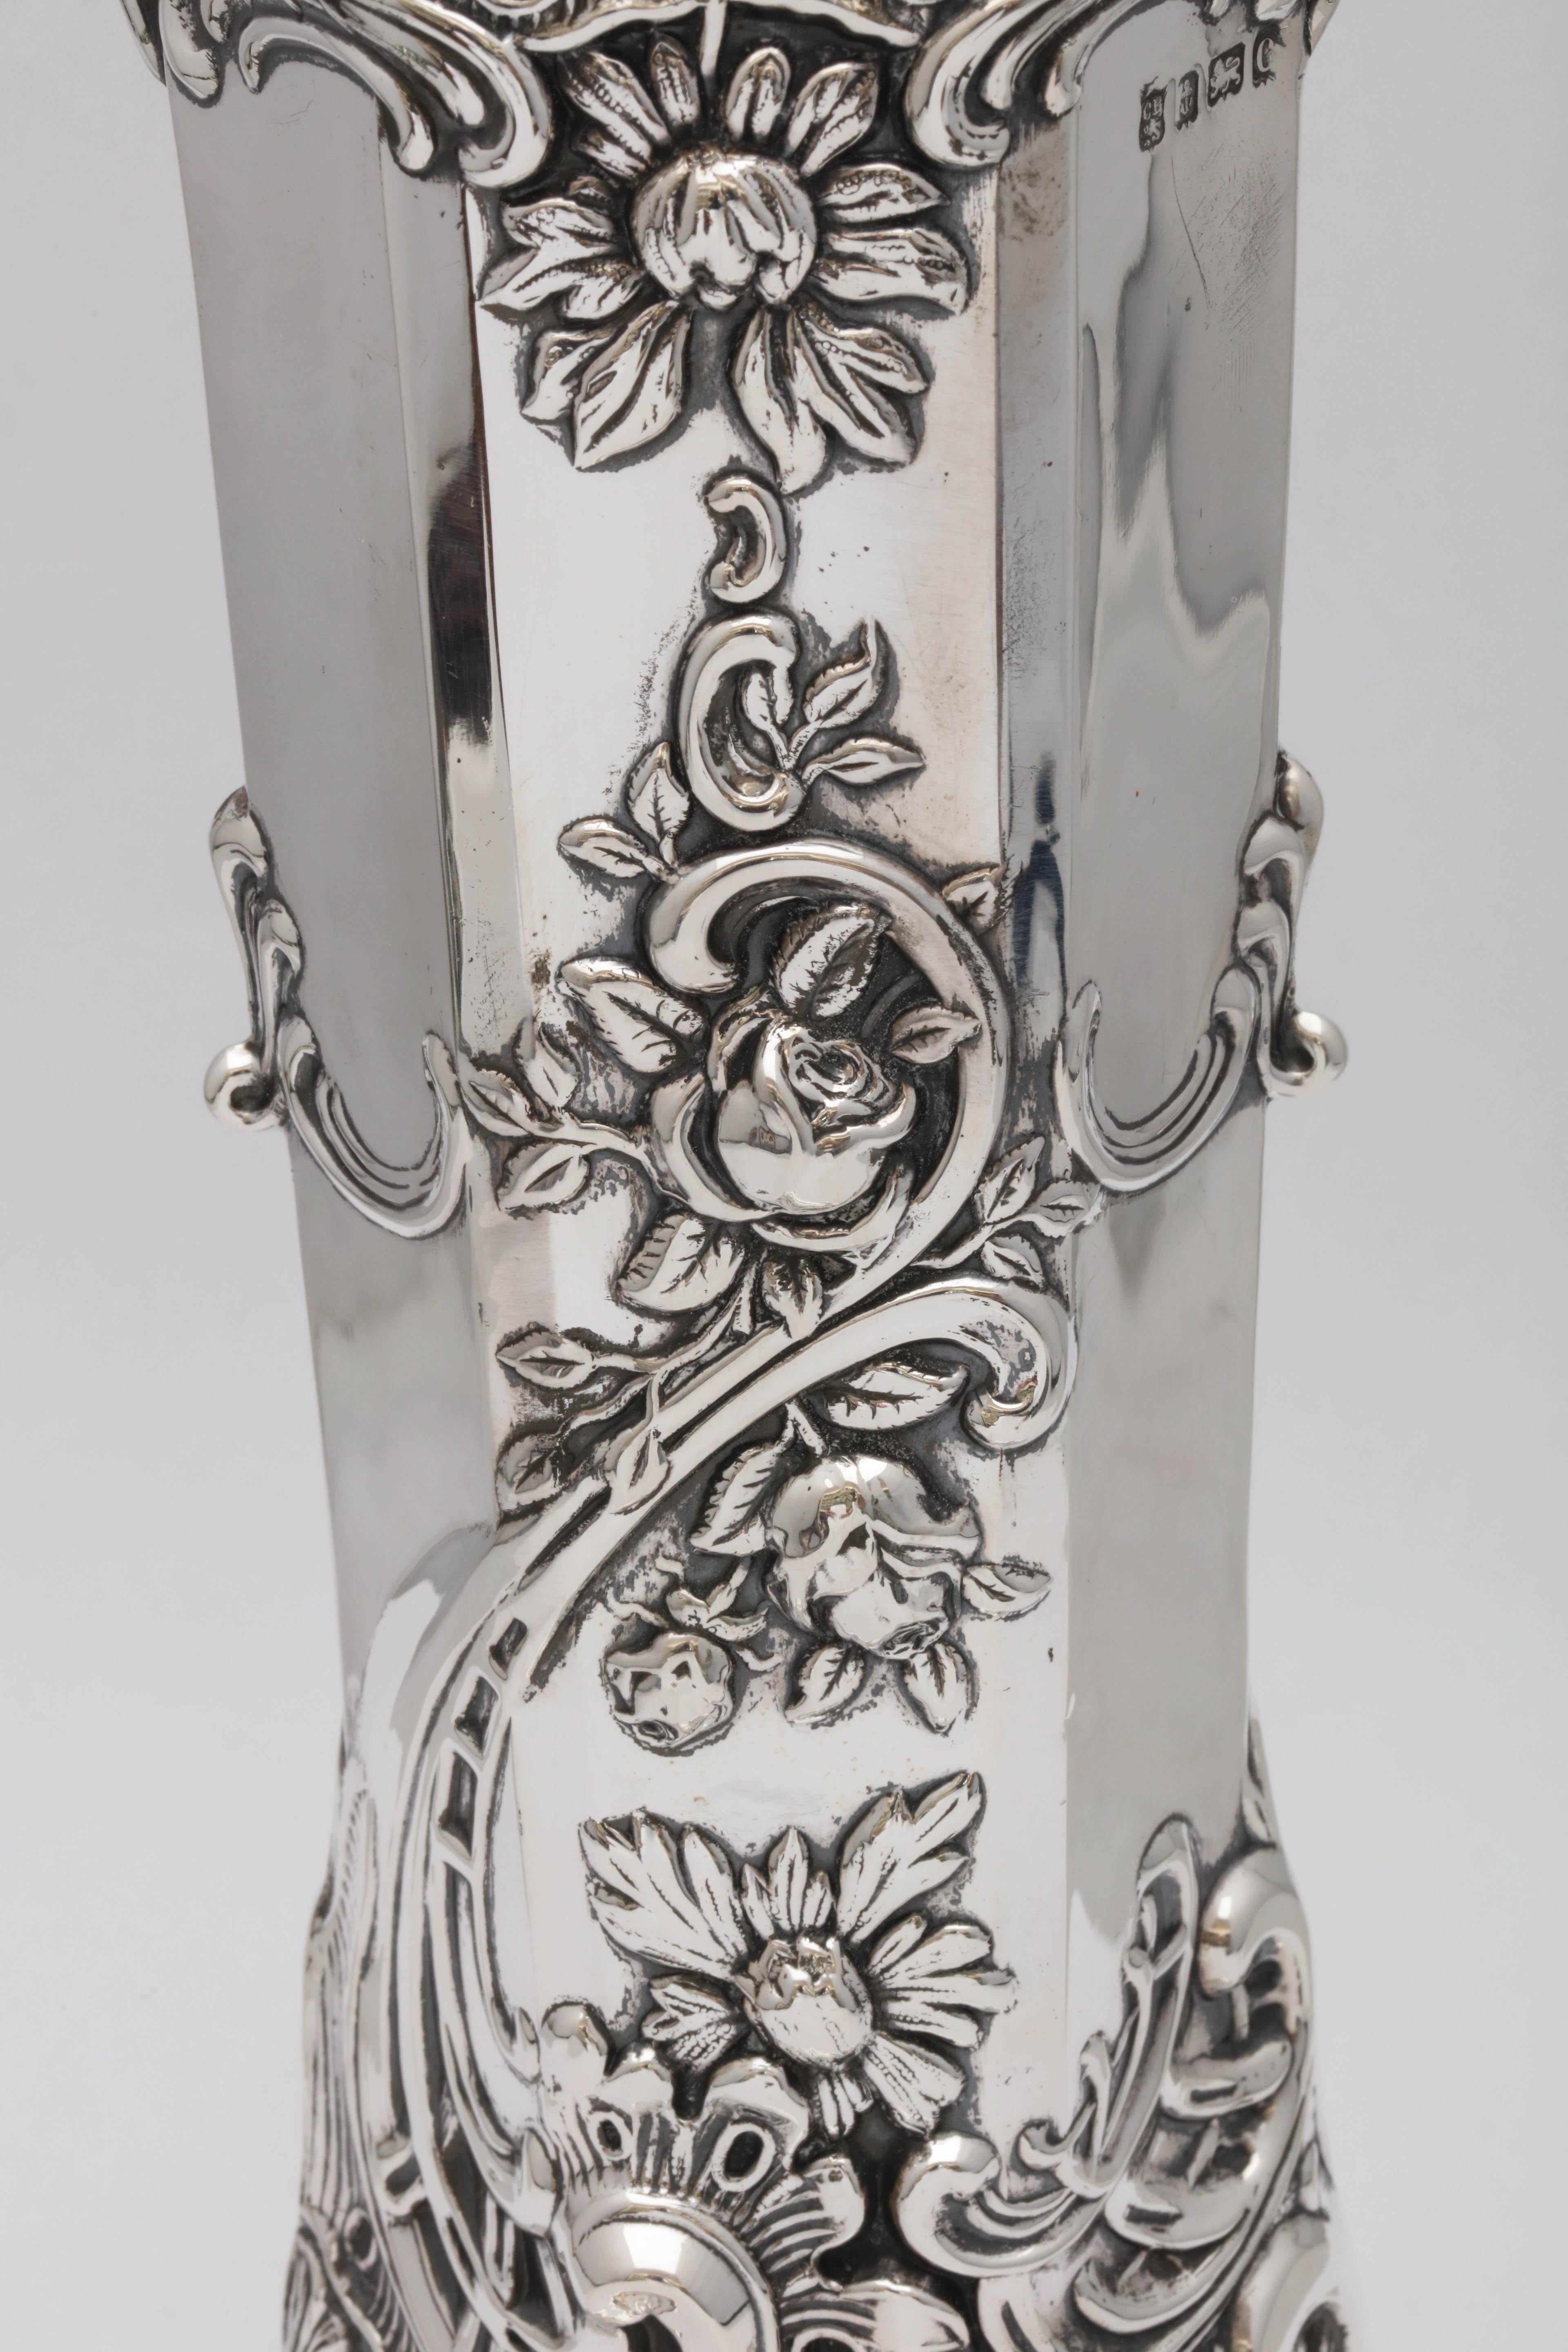 Sterling silver, Art Nouveau vase, Birmingham, England, 1902, Cooper Bros. and Sons - makers. Hexagonal in design, with beautiful floral decoration. Opening is scalloped in a hexagonal fashion. Stands 9 inches high x over 4 1/2 inches diameter